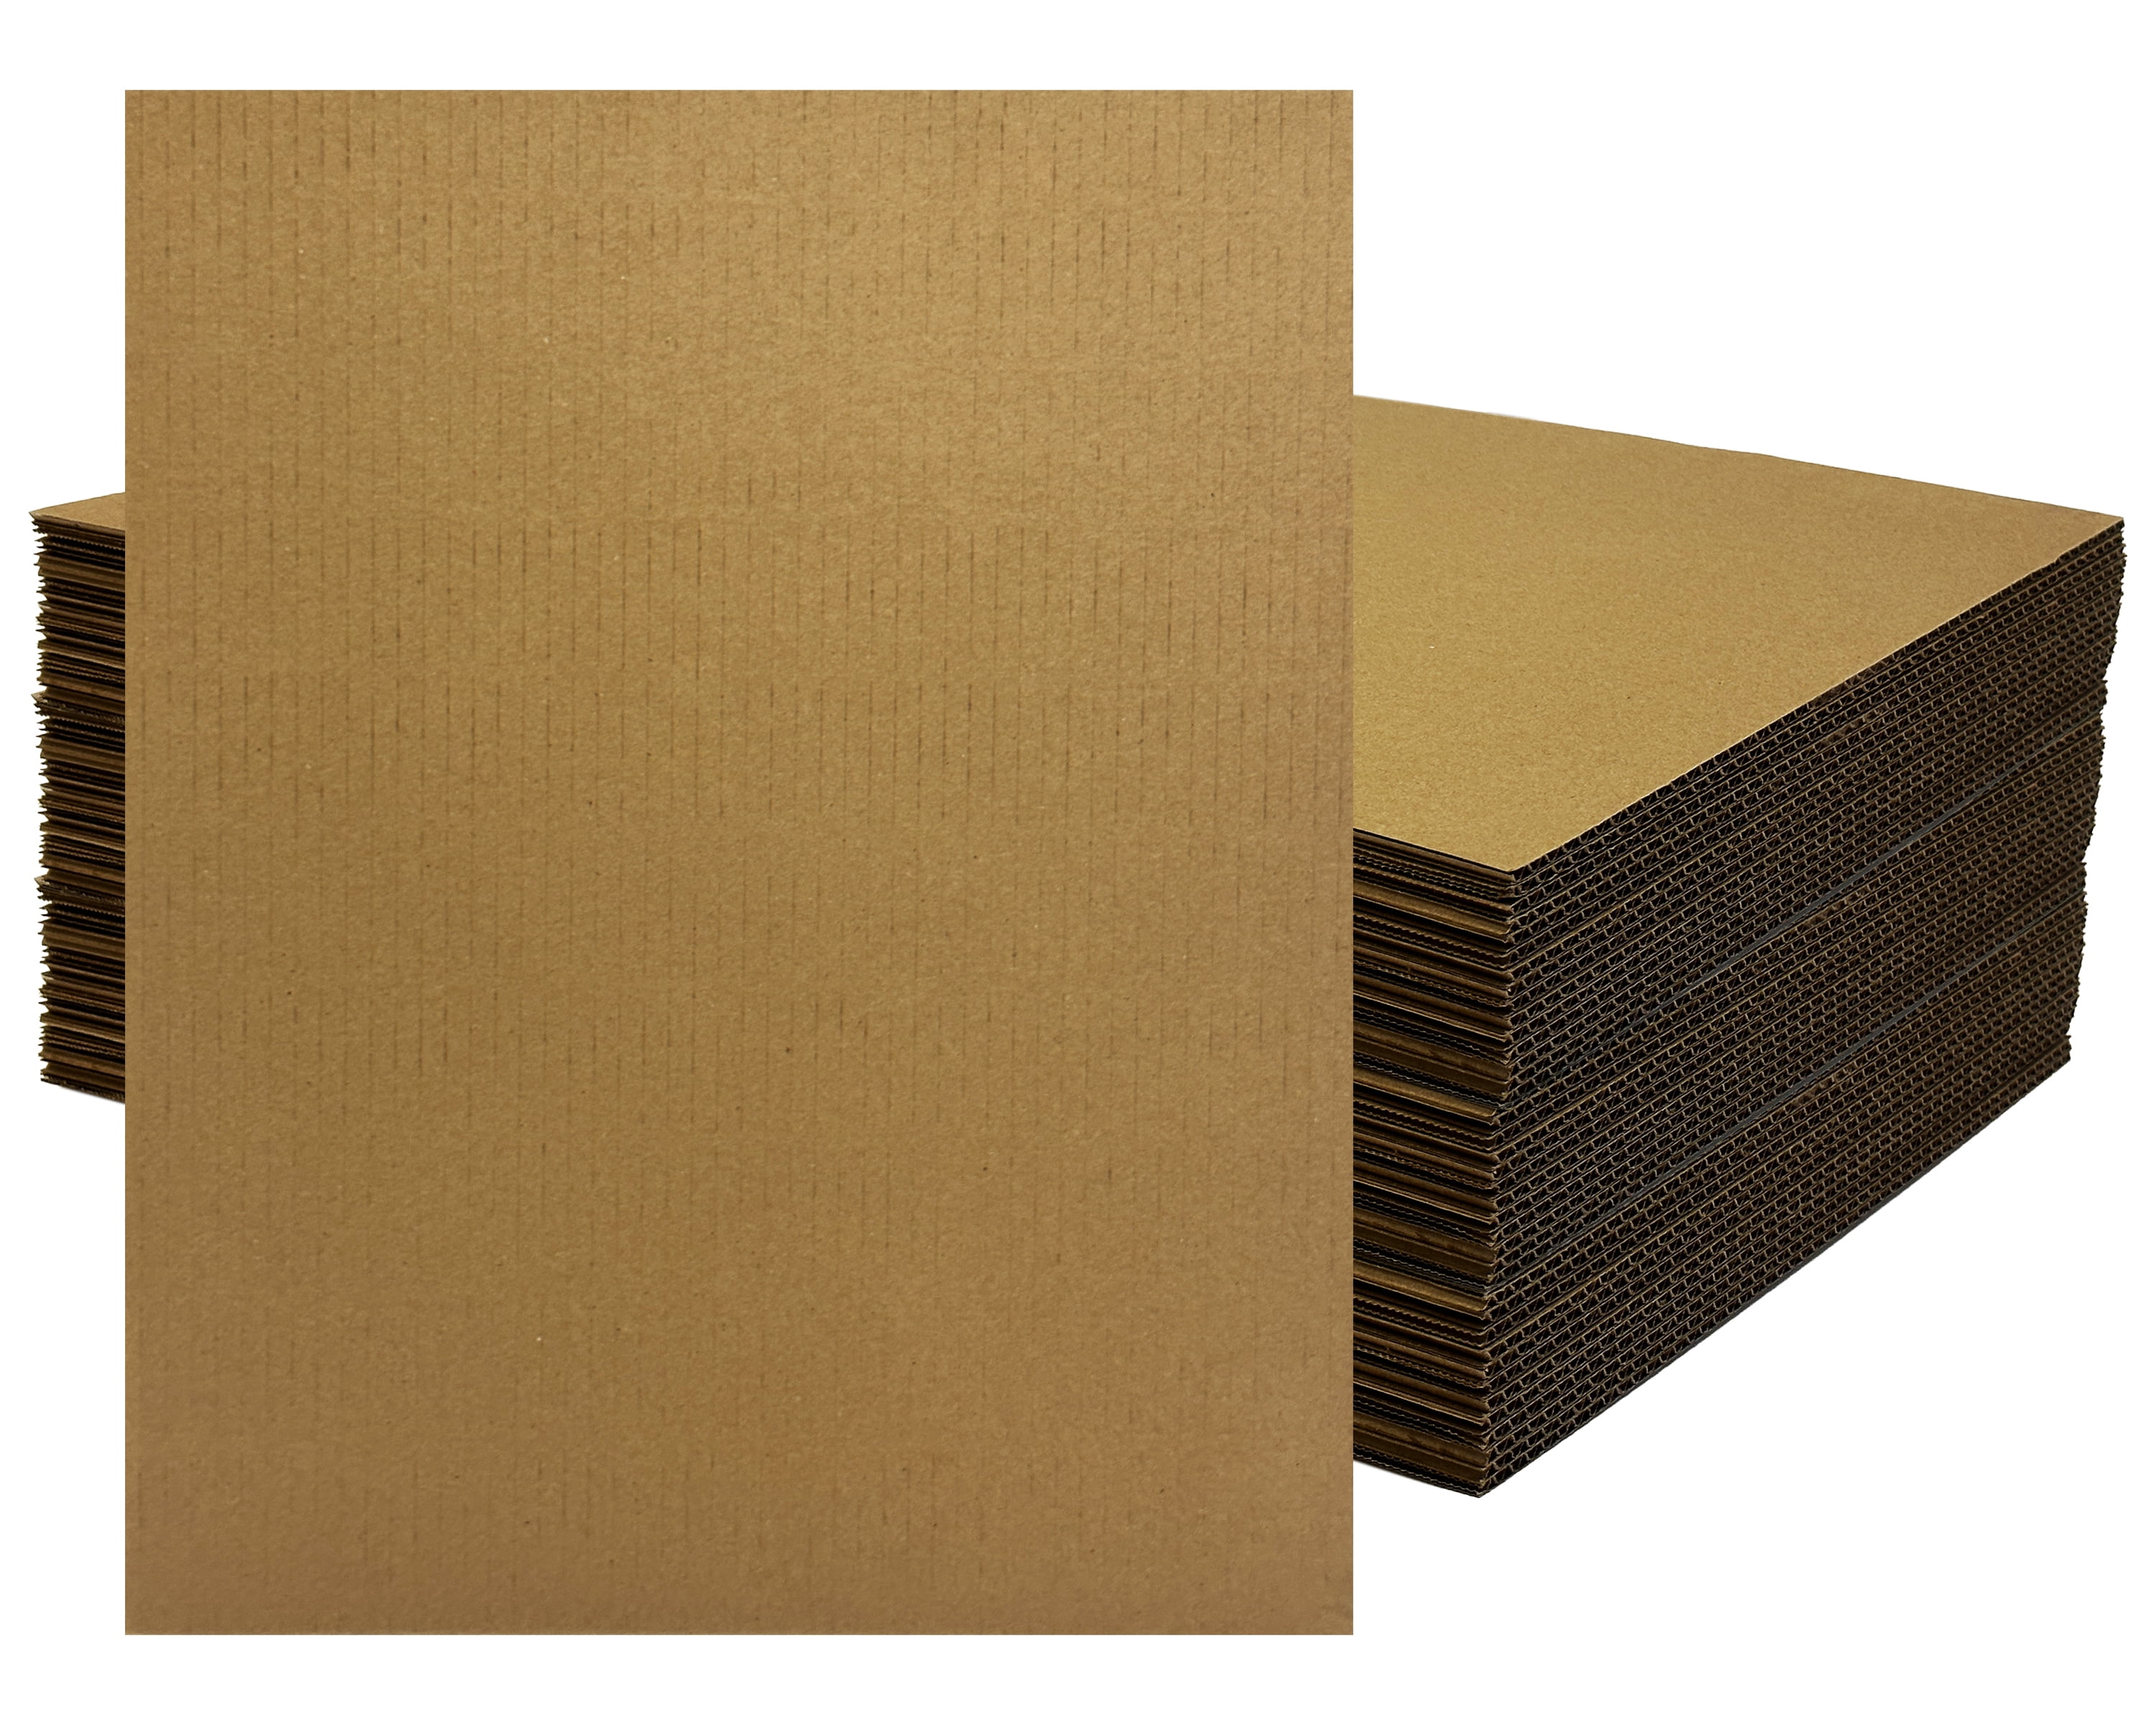 Corrugated Cardboard Sheets 4mm - 3/16 Thick 12x16- 5 Pack. Filler Insert  Pads, Brown Frame Backing Rectangular & Square Flat Boards for Art&Crafts